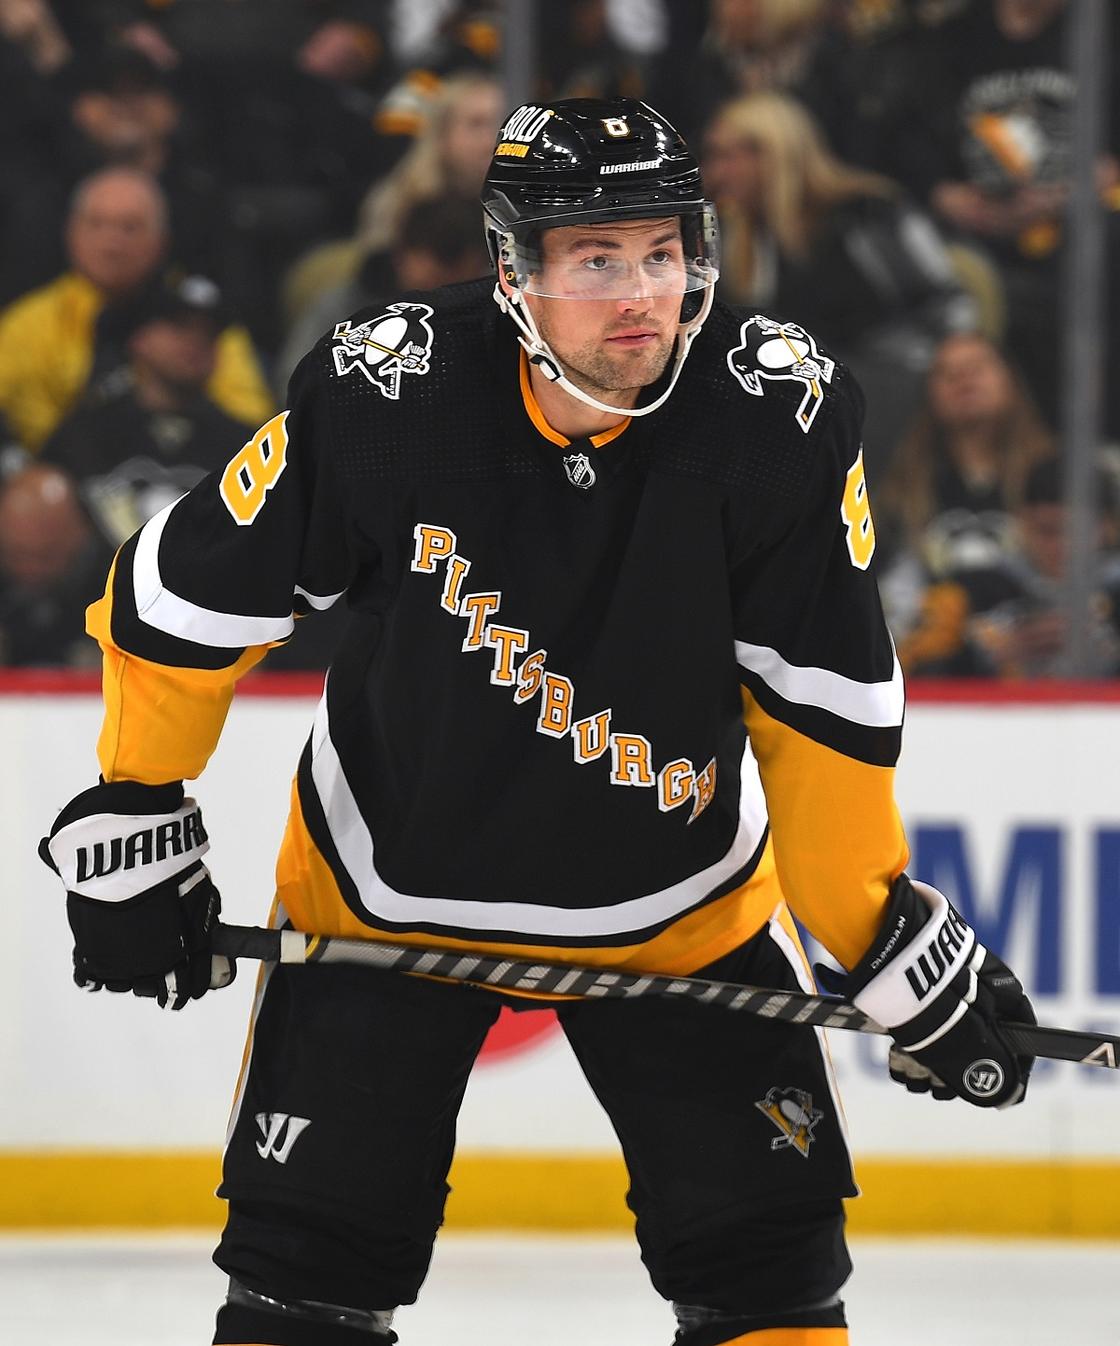 How many Stanley Cups does Brian Dumoulin have?